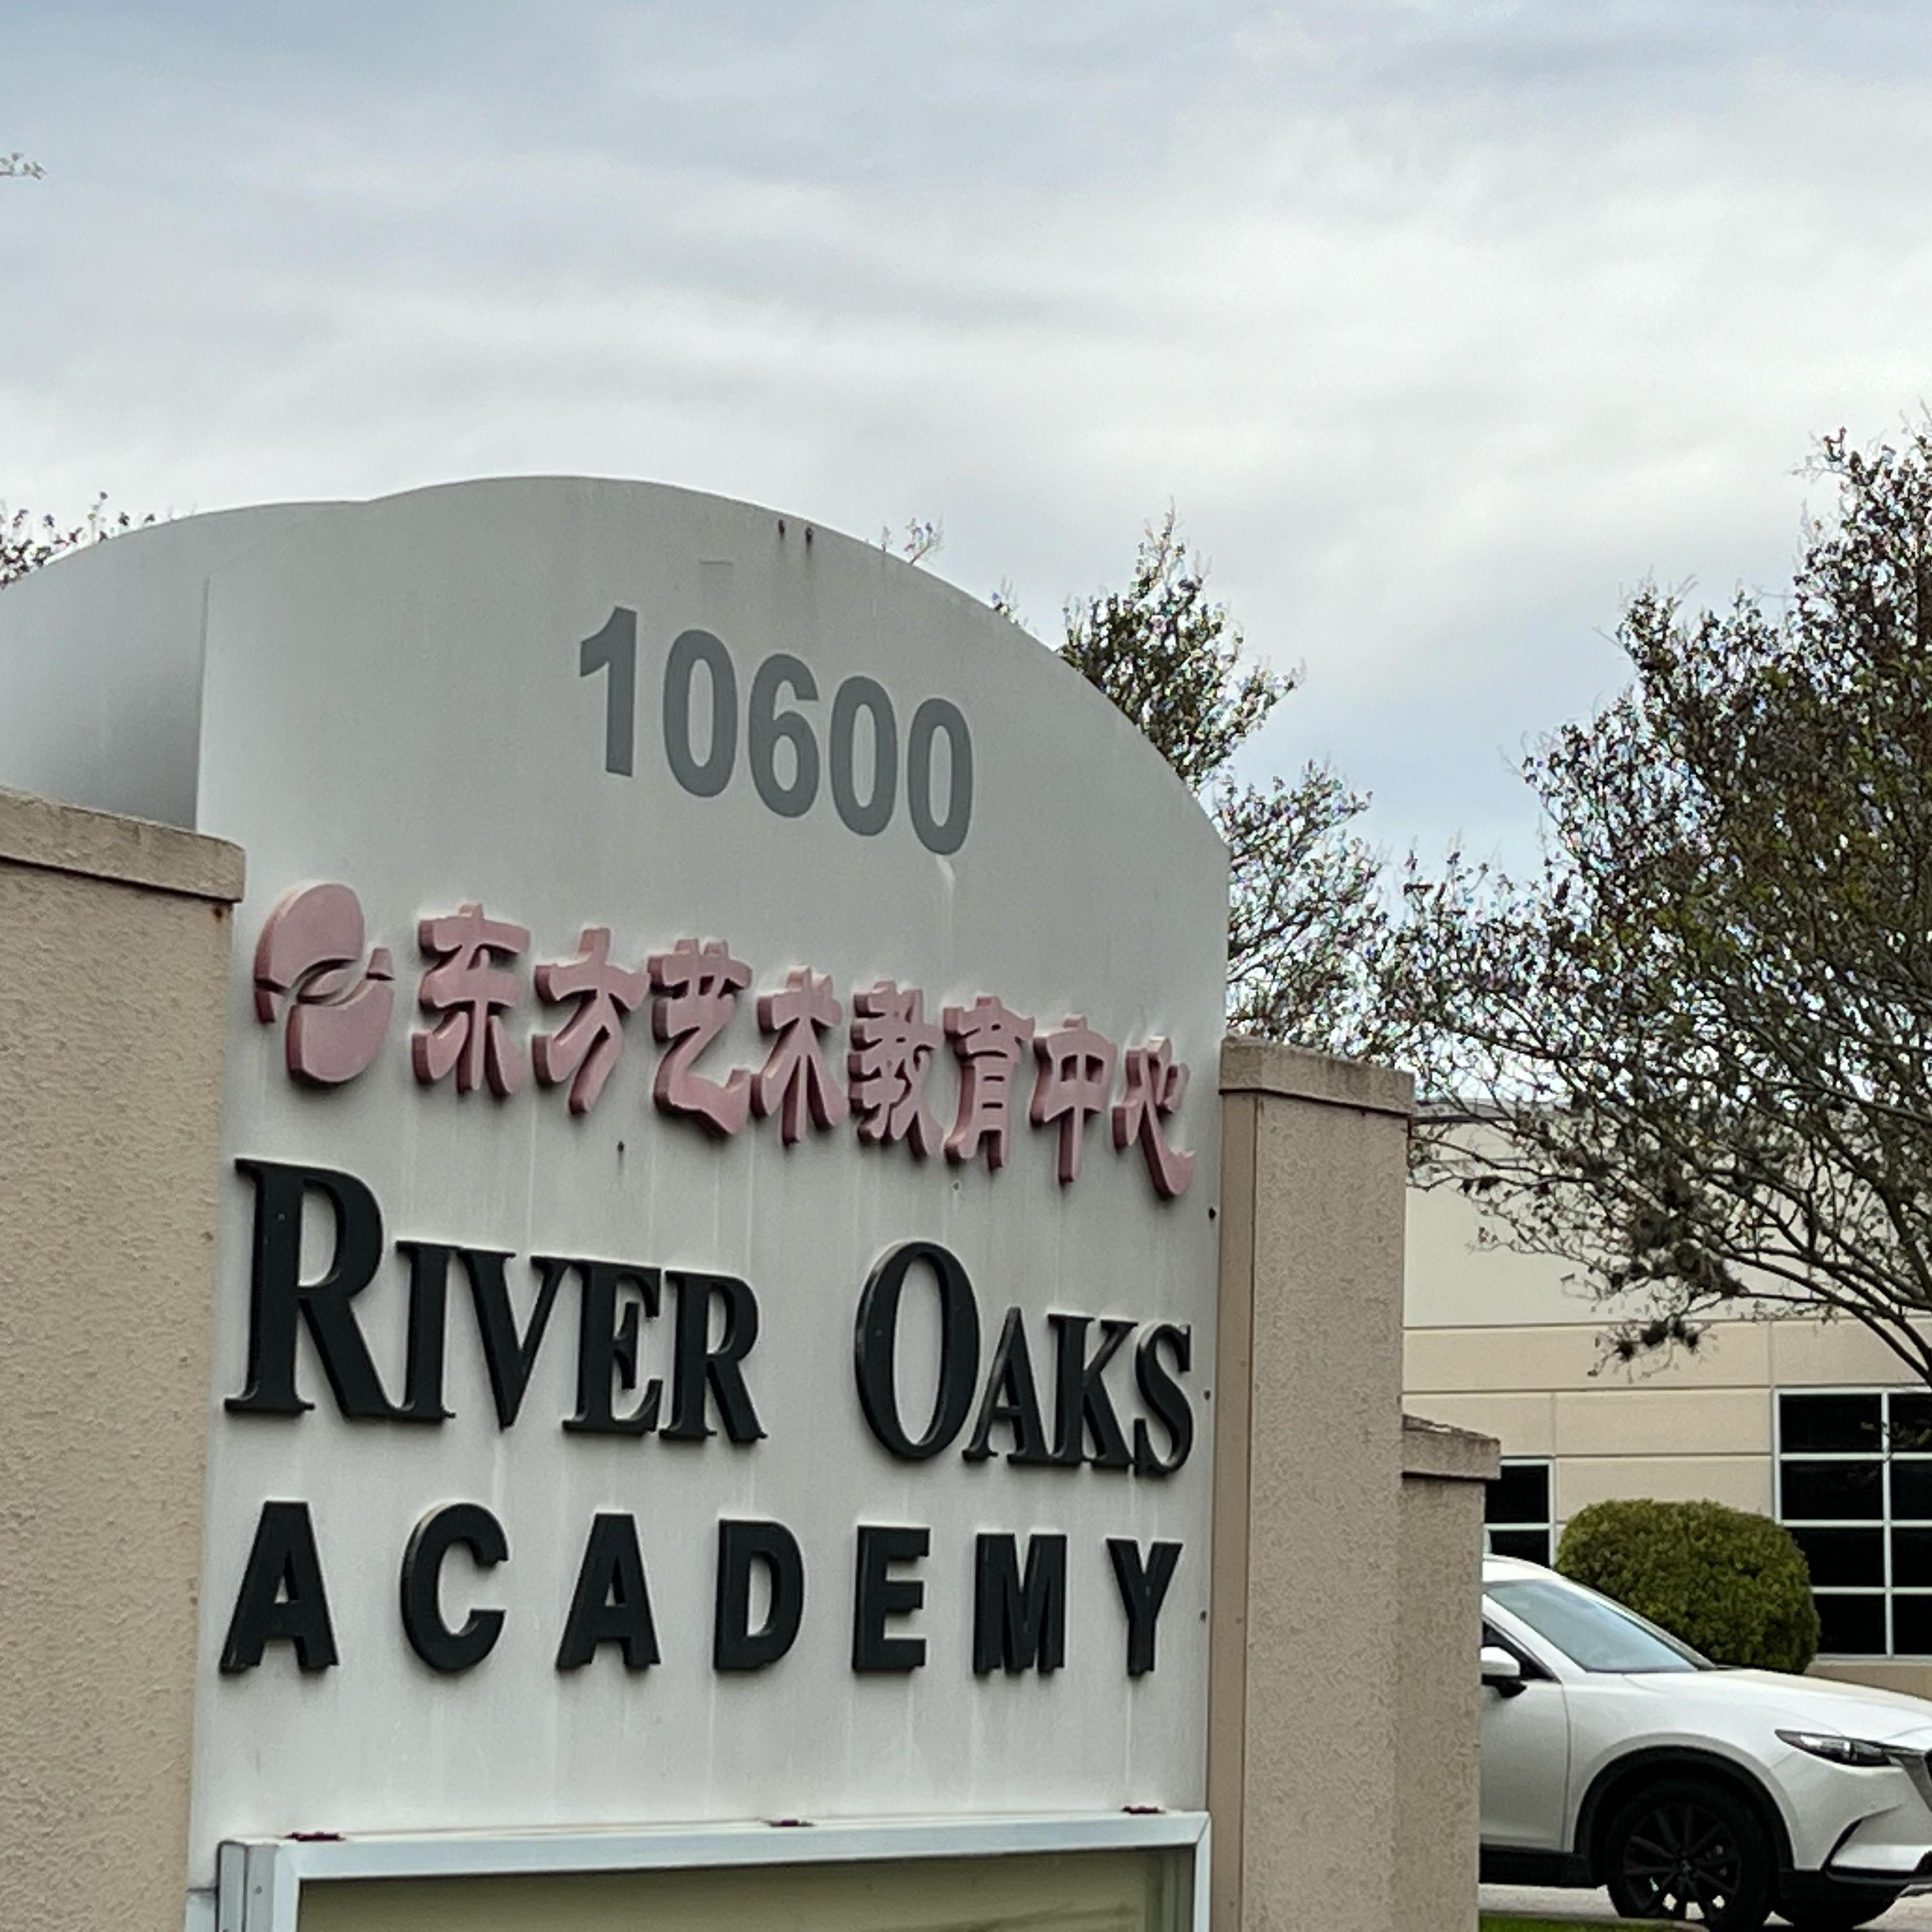 bluefrog Plumbing and Drain services the Houston Texas River Oaks Academy